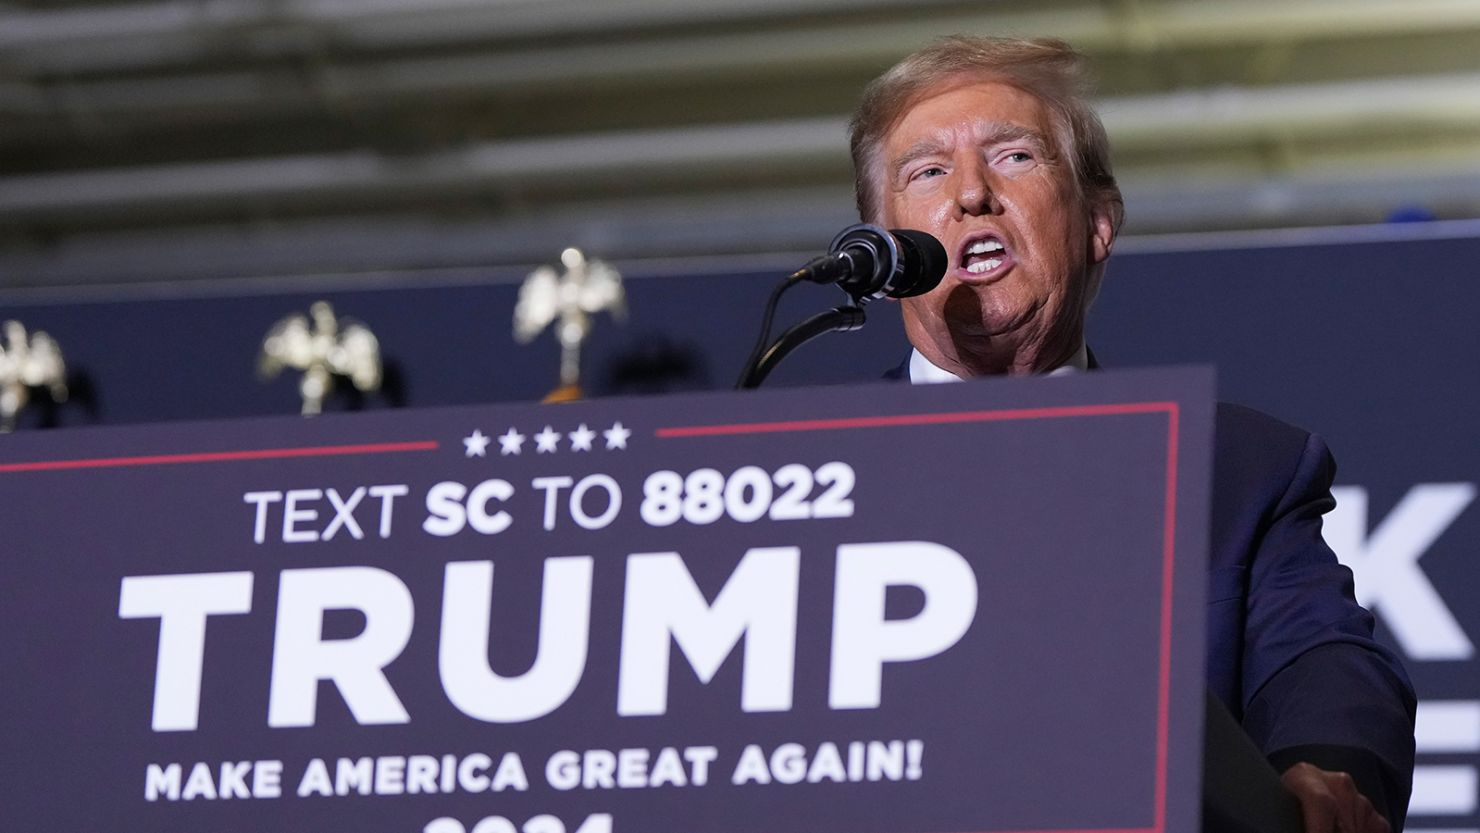 Republican presidential candidate former President Donald Trump speaks at a campaign rally at Charleston Area Convention Center in North Charleston, South Carolina, February 14, 2024.